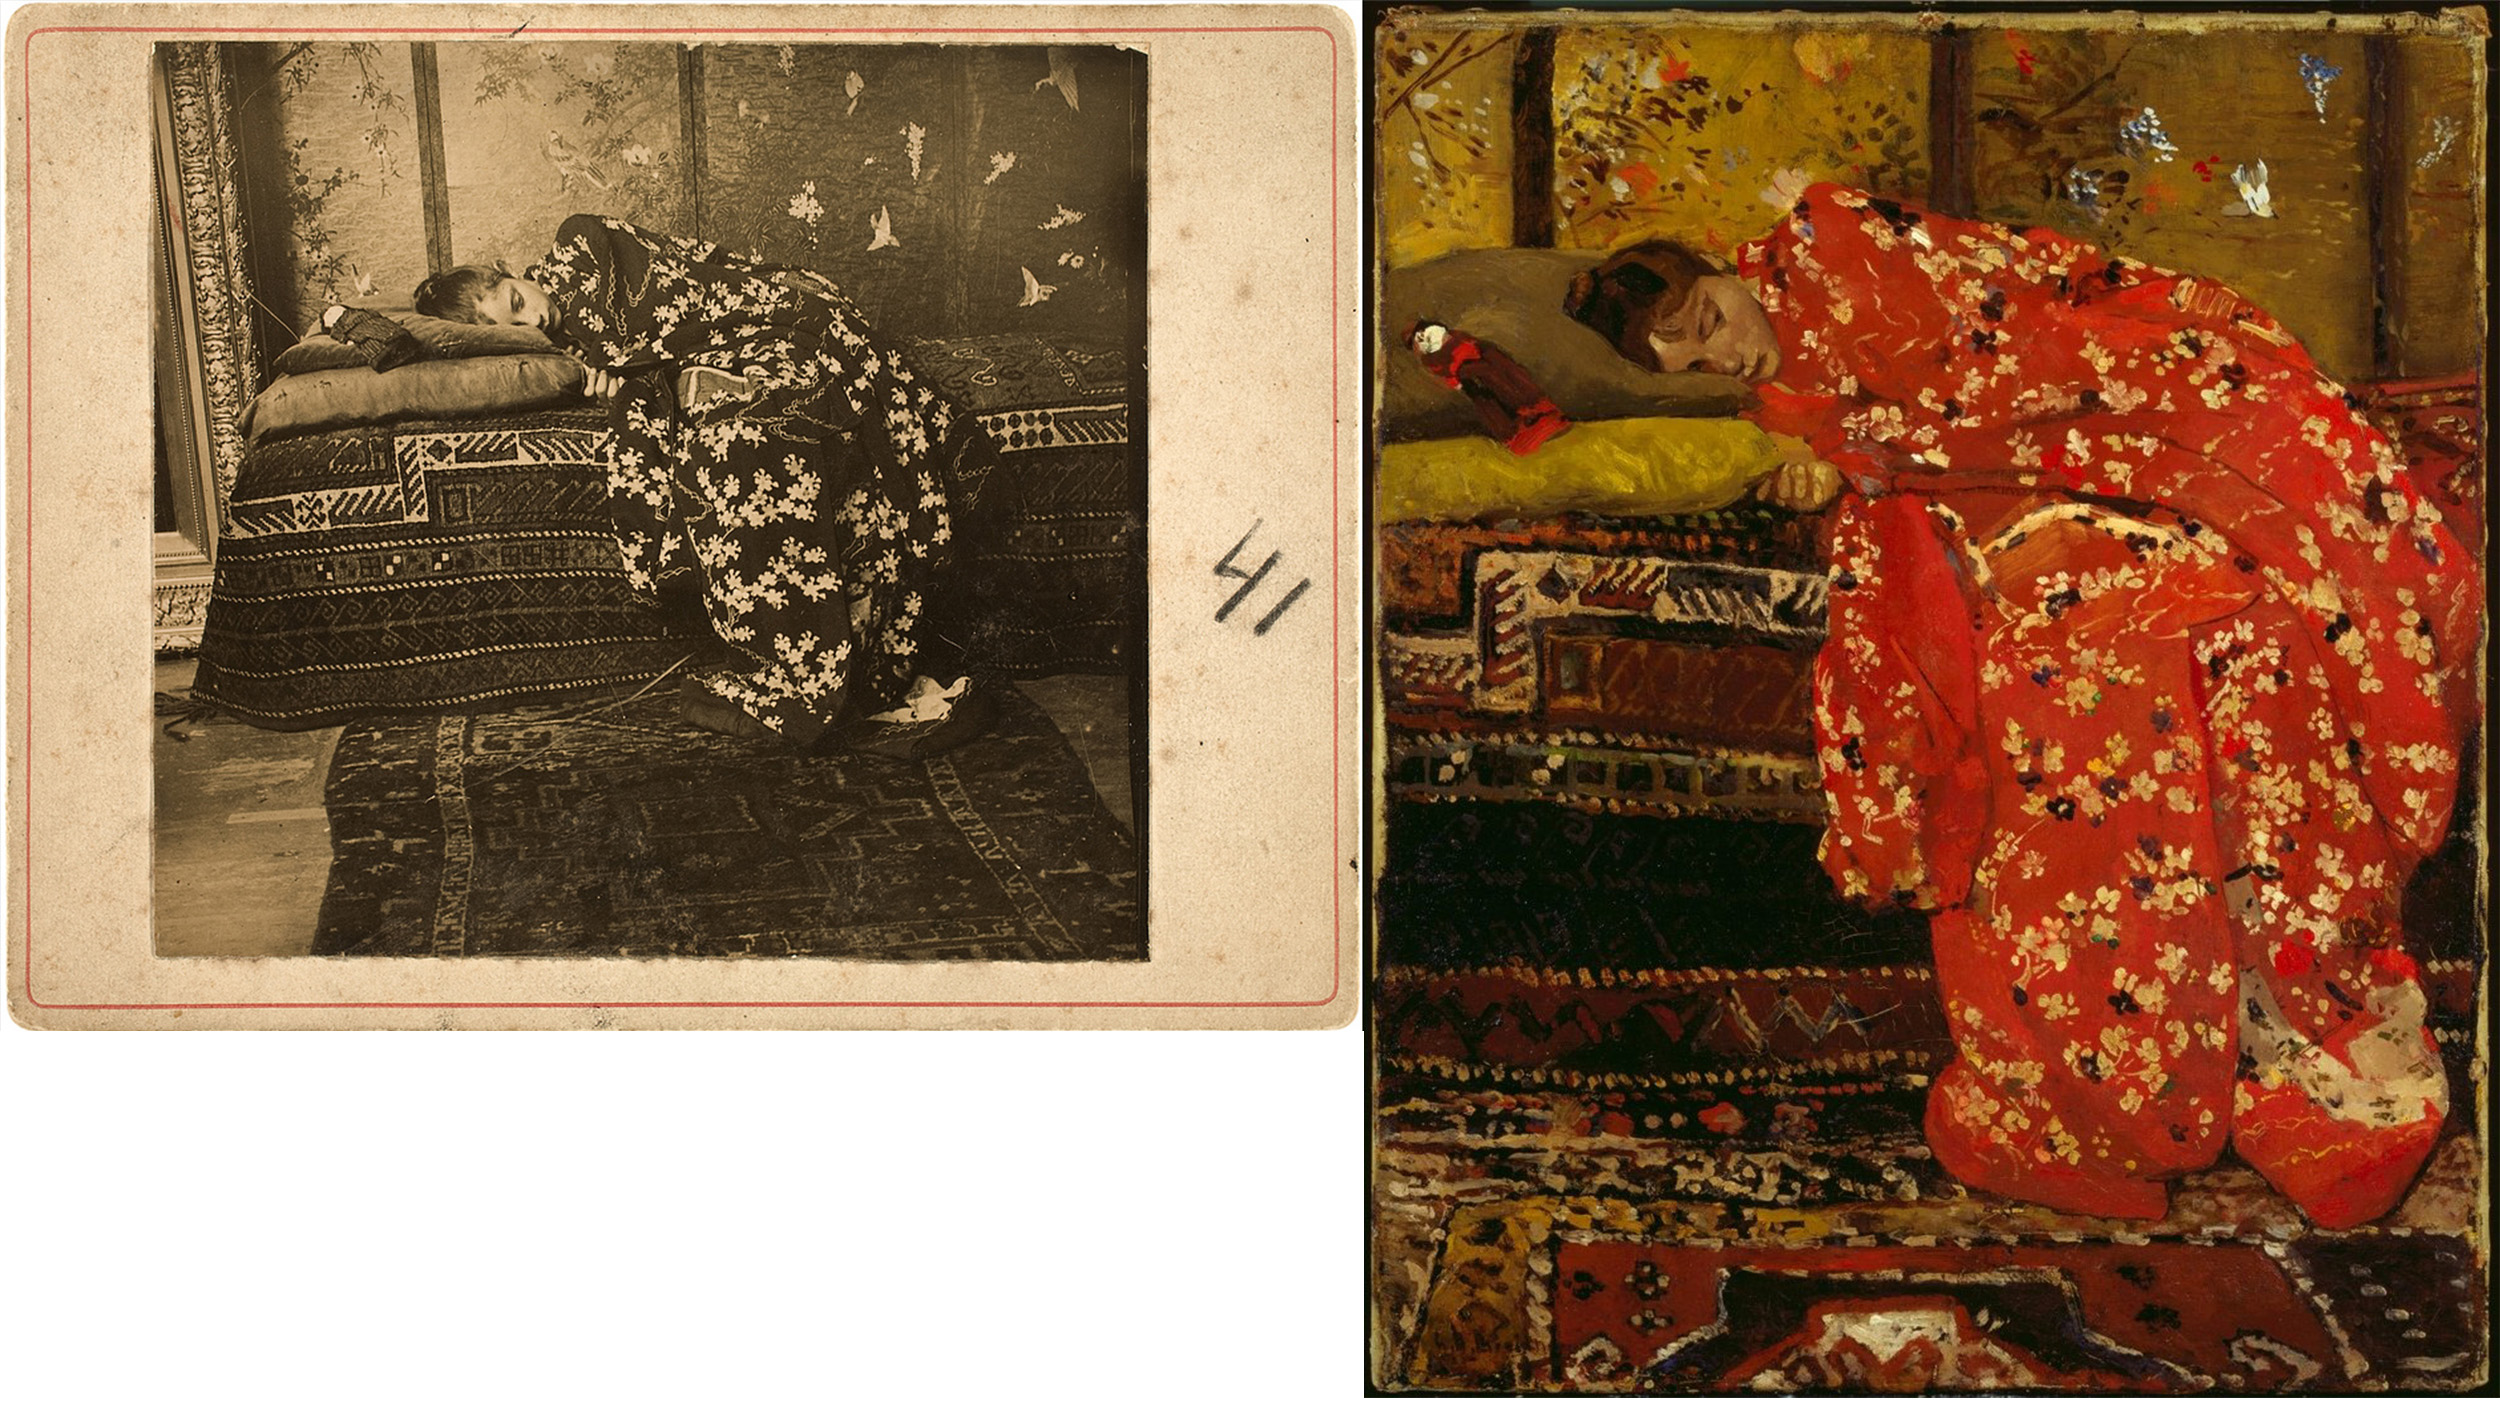 Girl in a Kimono by George Hendrik Breitner - 1893-95 - 31 x 39 cm, 61 x 50 cm private collection